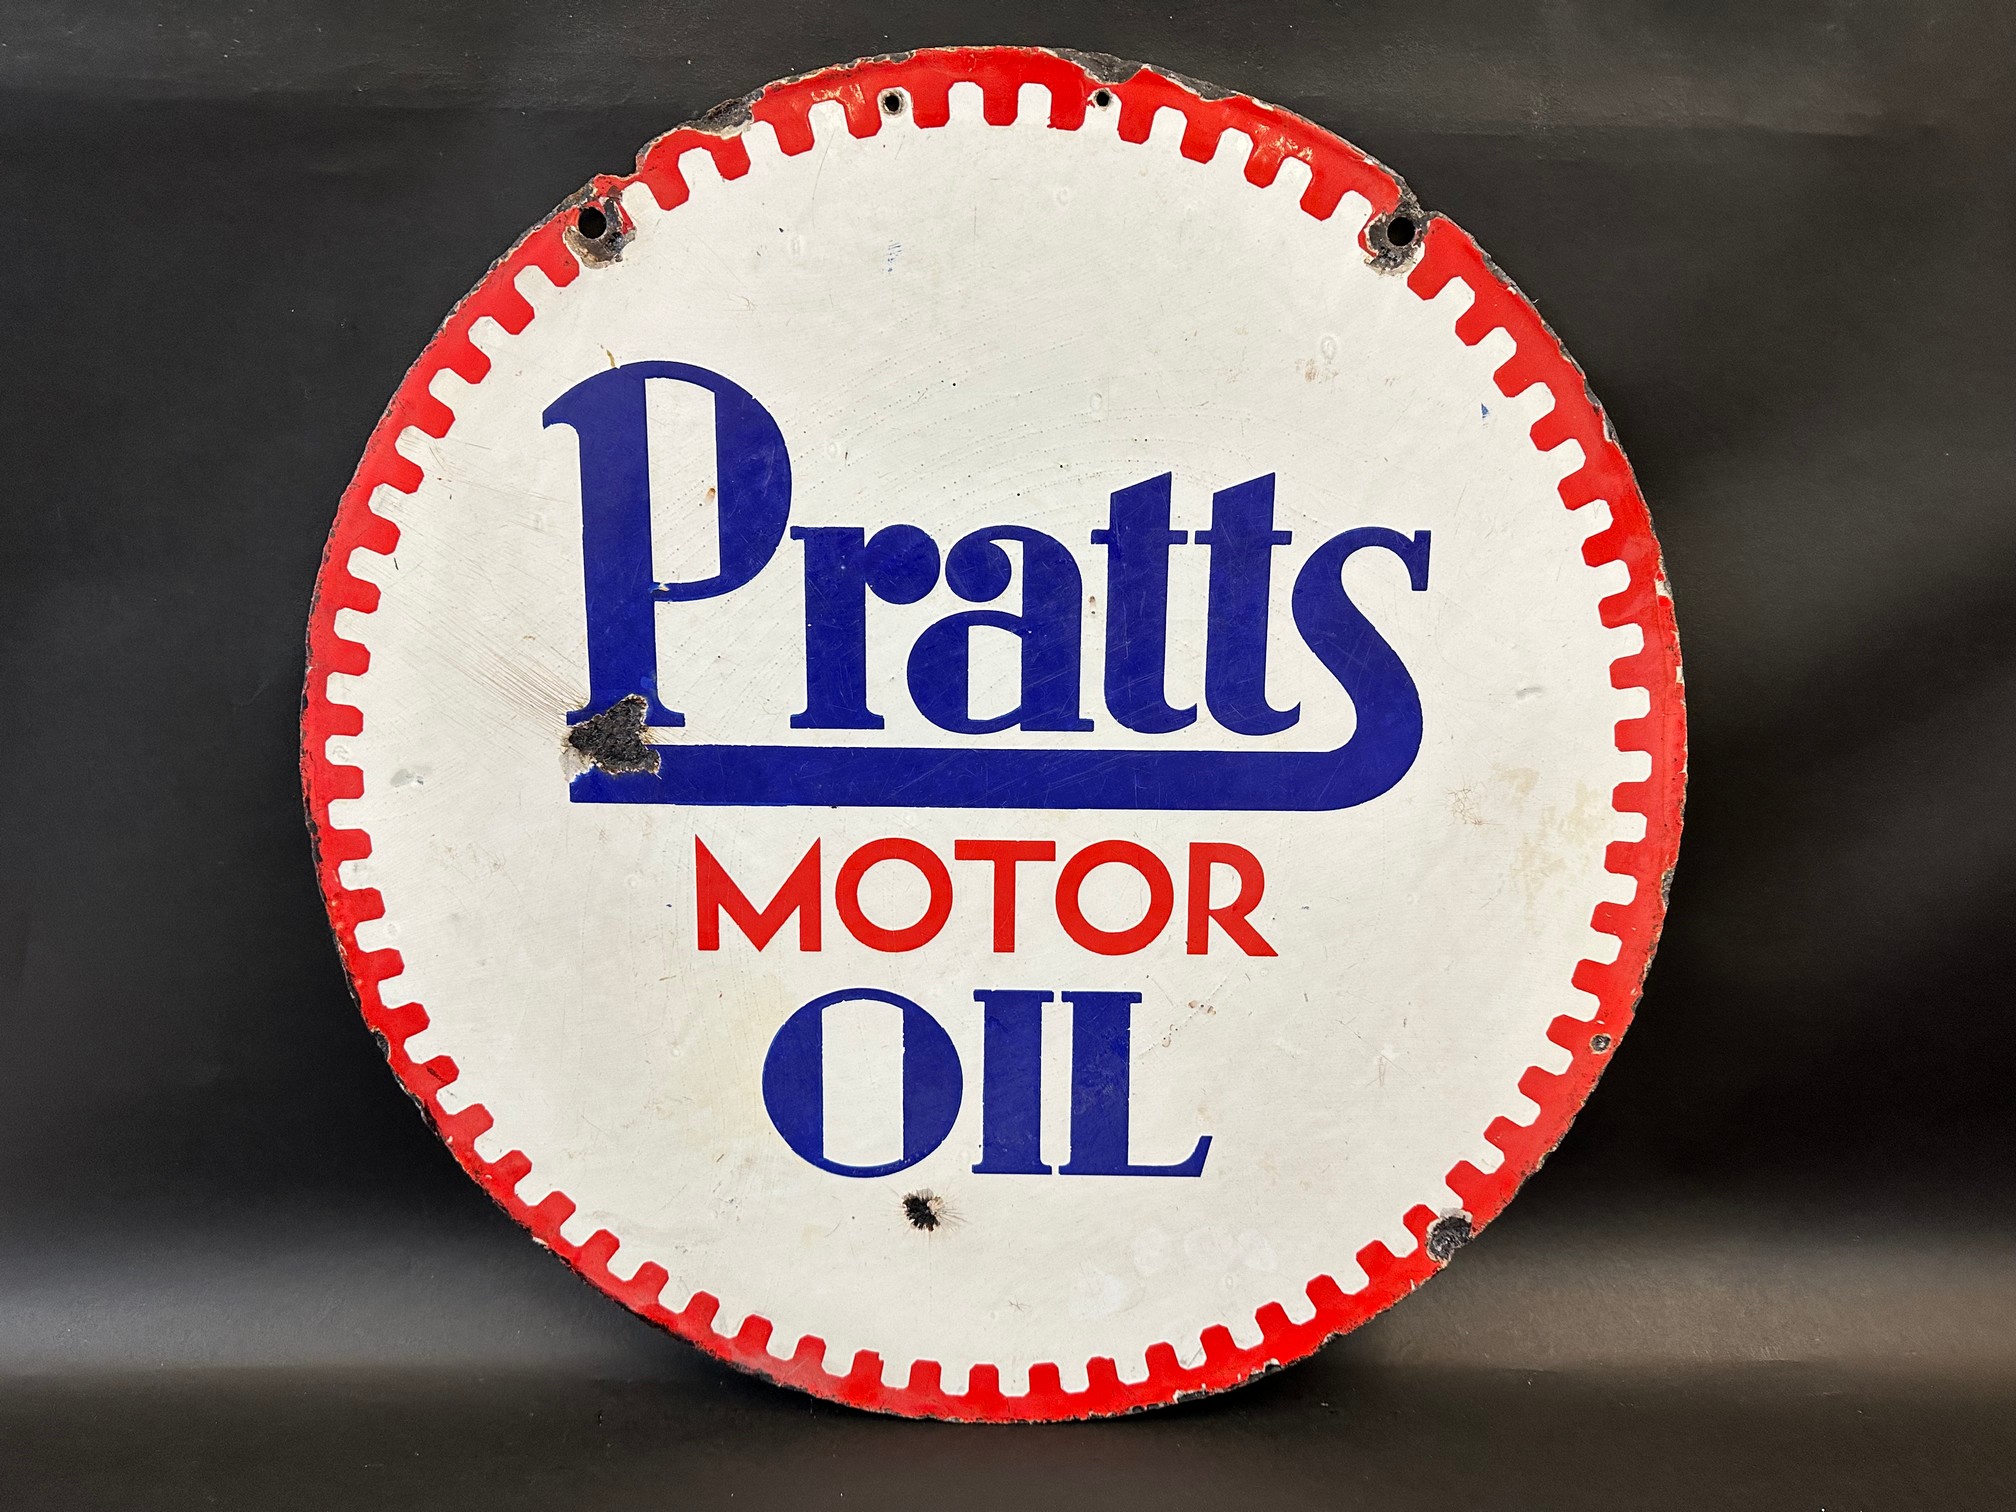 A Pratts Motor Oil circular double sided enamel sign by Bruton of Palmers Green, dated December - Image 4 of 5